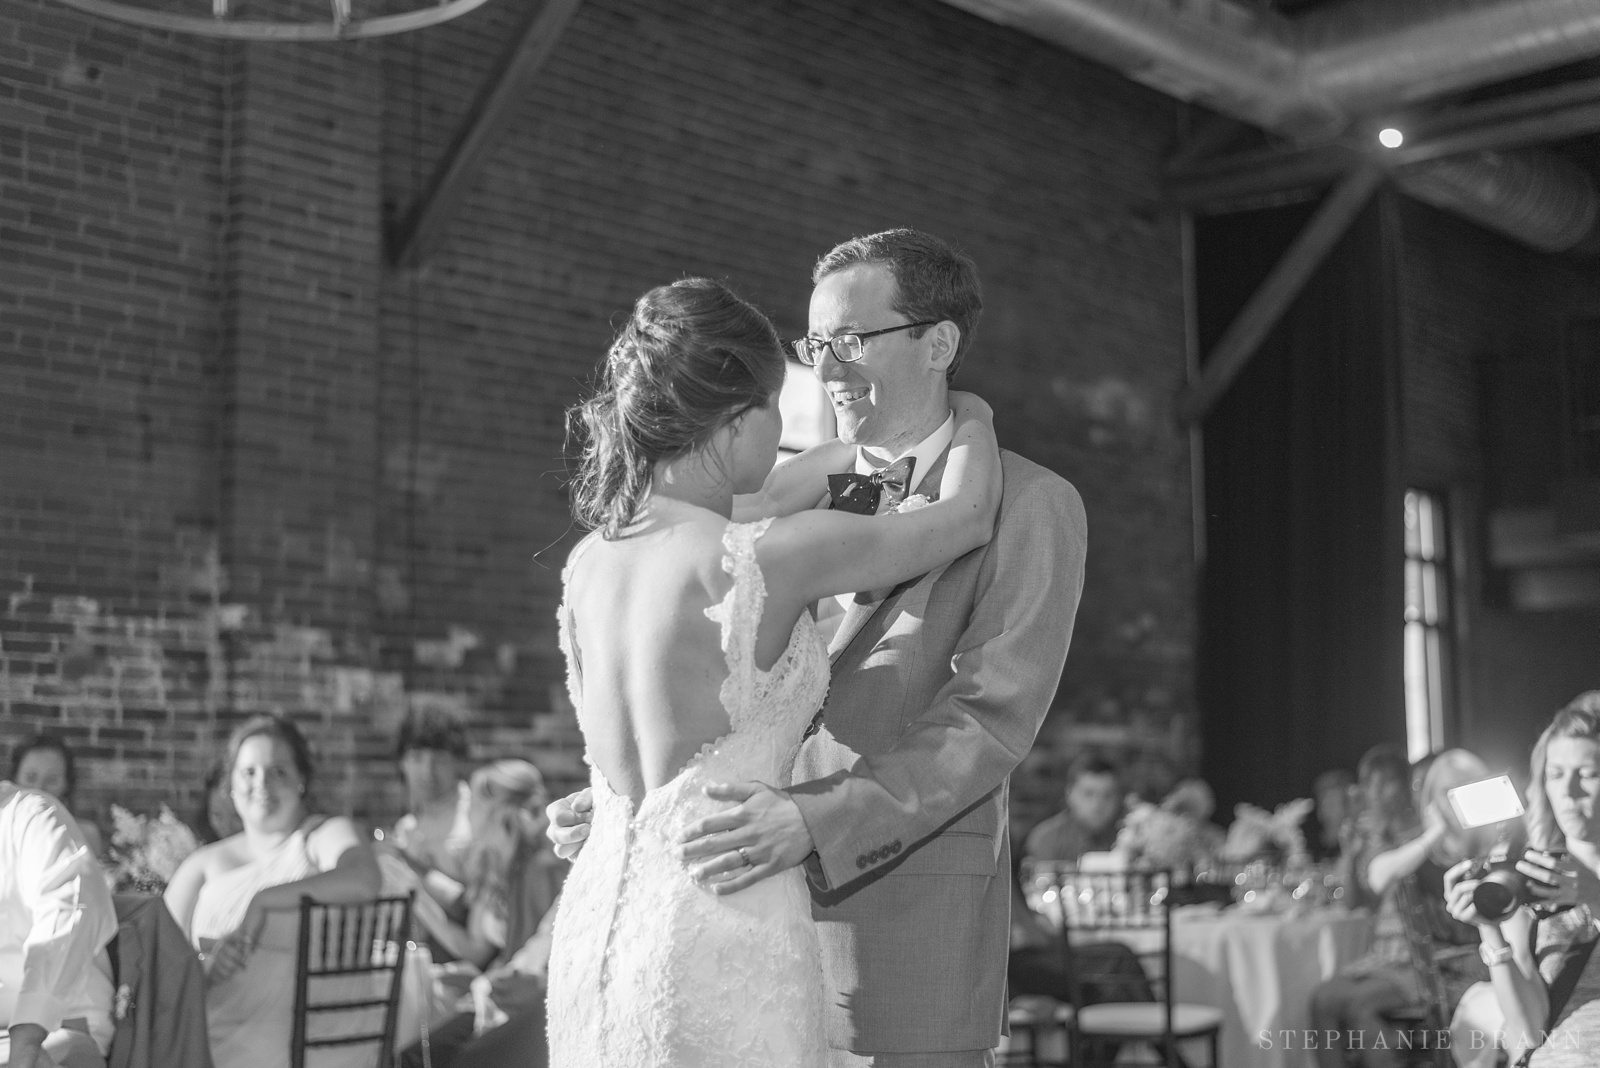 bride-and-groom-dancing-to-their-first-dance-song